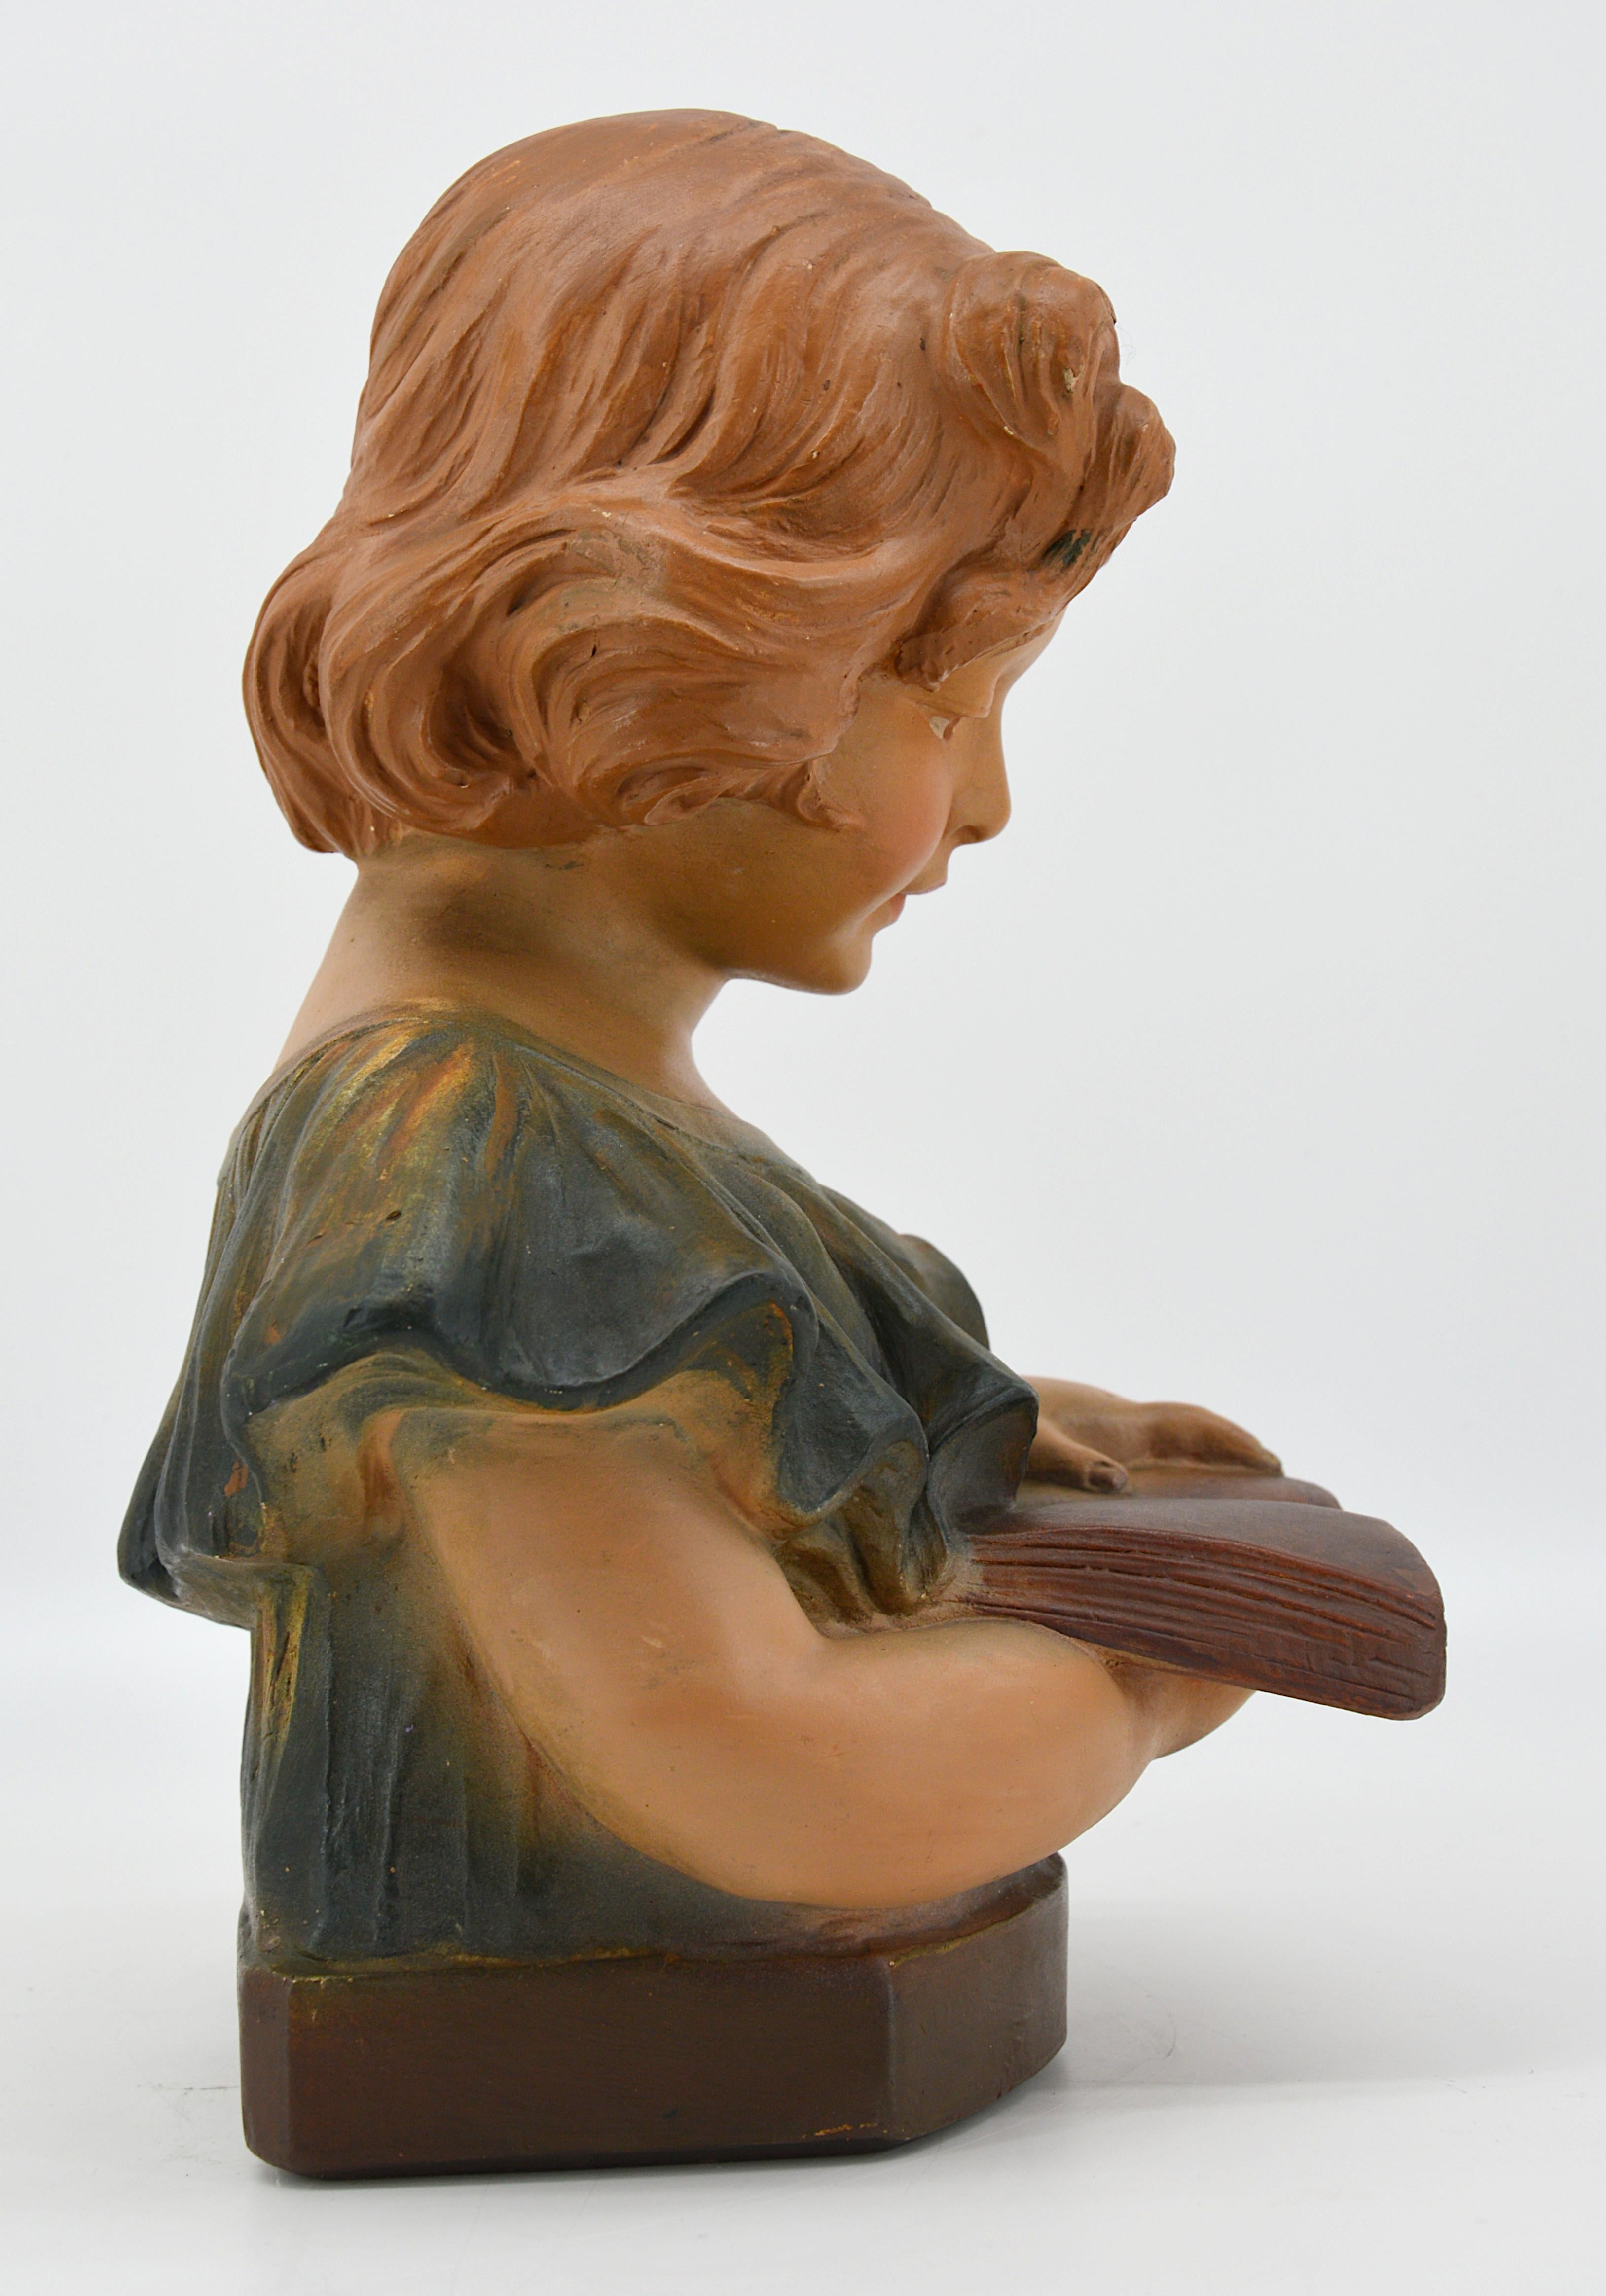 Polychromed French Art Deco Plaster Child Reading a Book Sculpture, 1920s For Sale